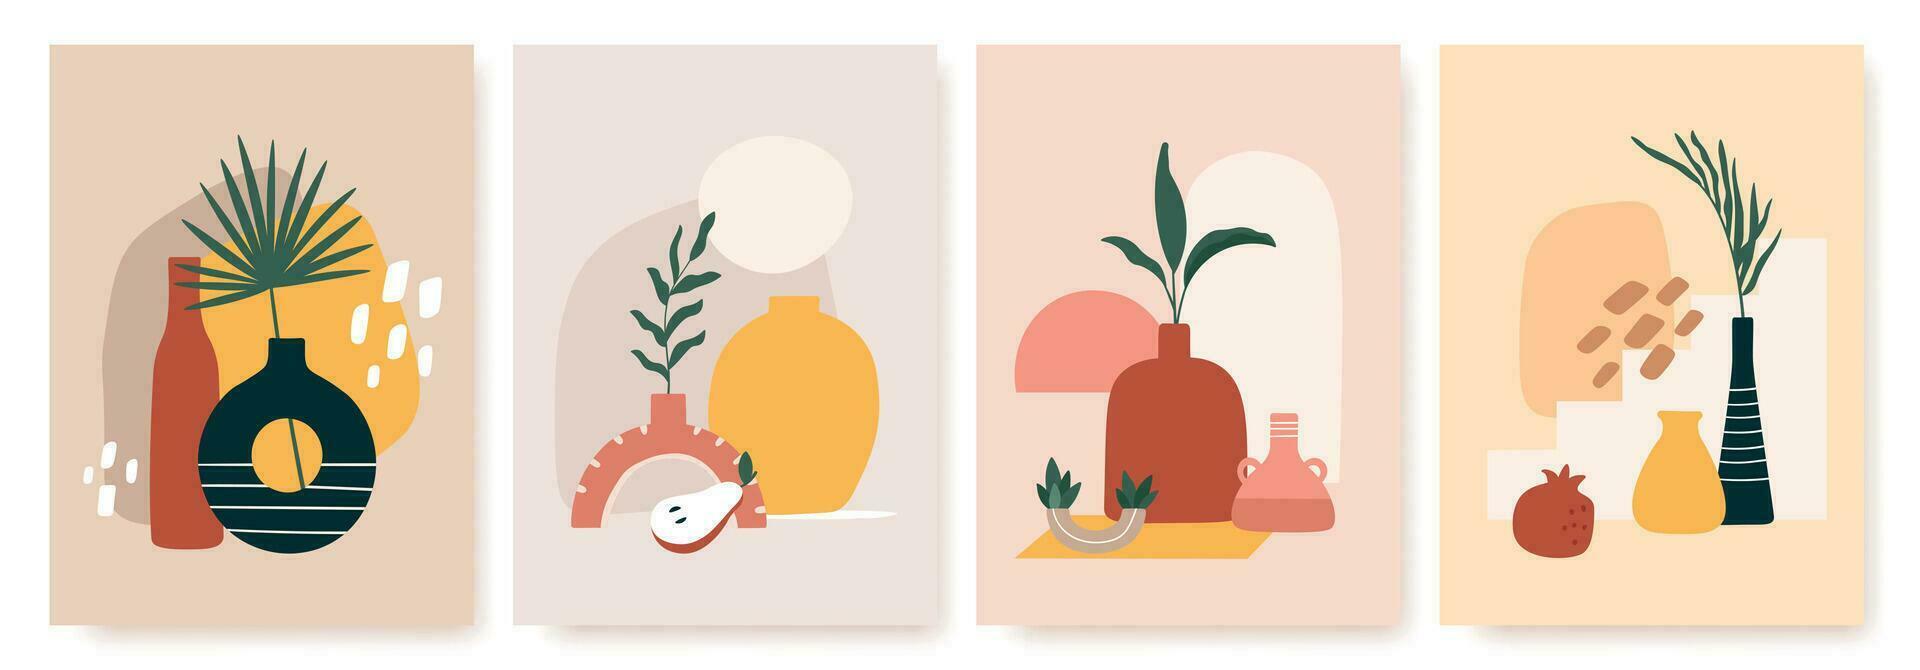 Abstract posters with vases. Trendy still life collage with pot, fruit, vase and tropical palm leaf. Hand drawn minimalist shape vector set